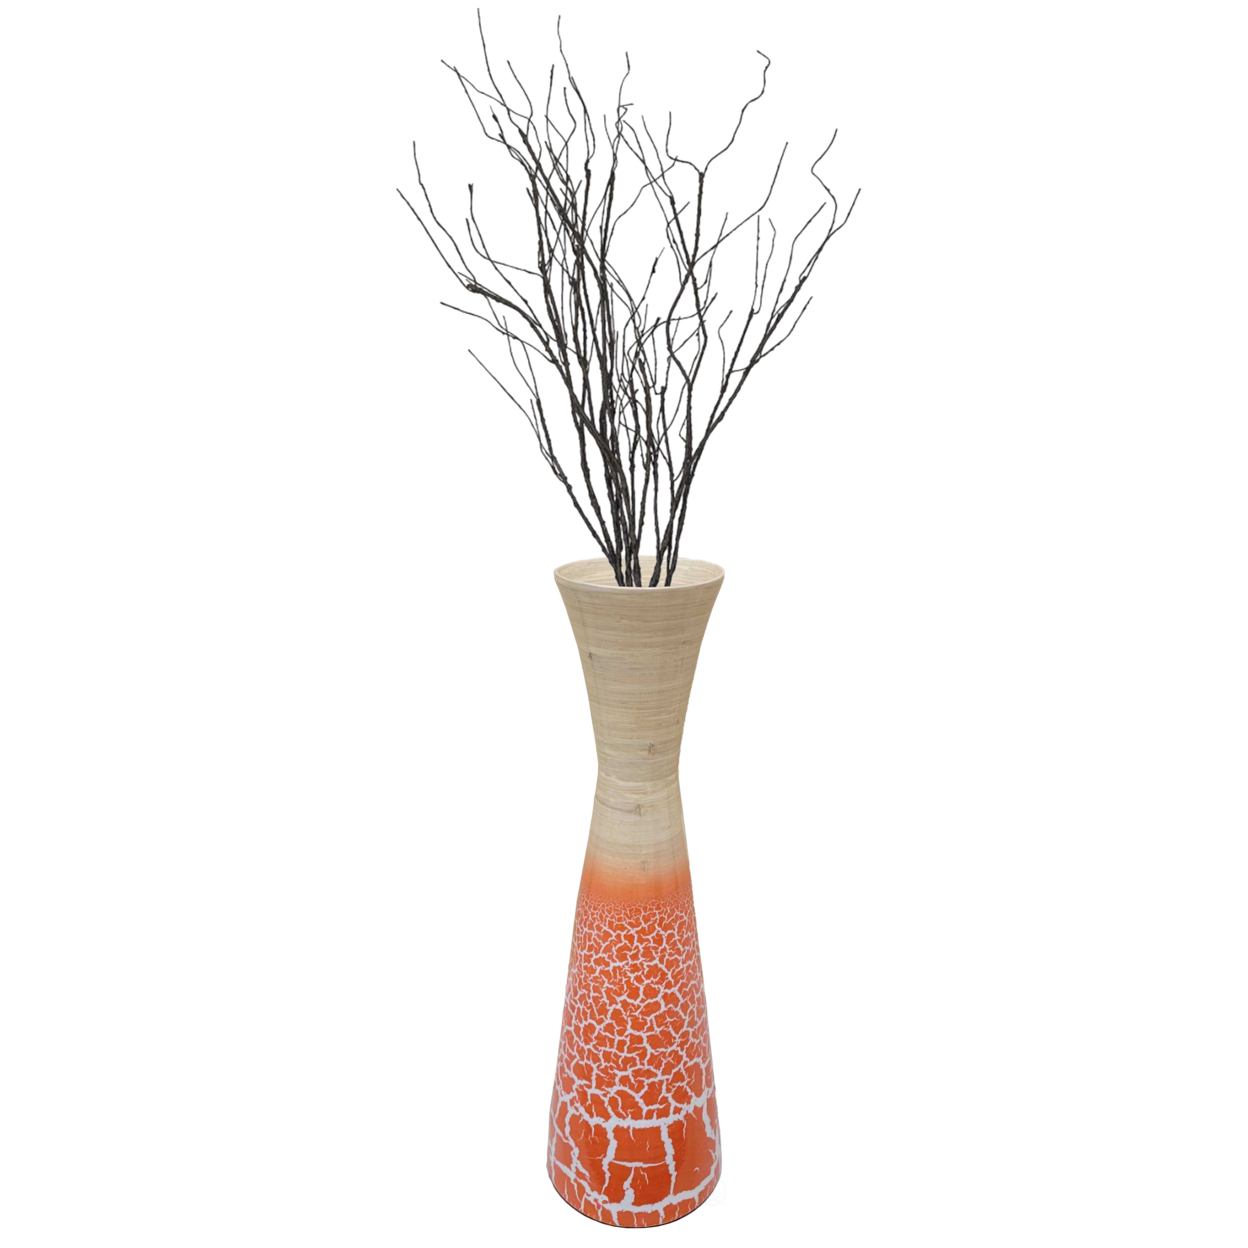 Uniquewise 27 Contemporary Bamboo Floor Flower Vase Hourglass Design For Dining, Living Room, Entryway Decoration - Orange